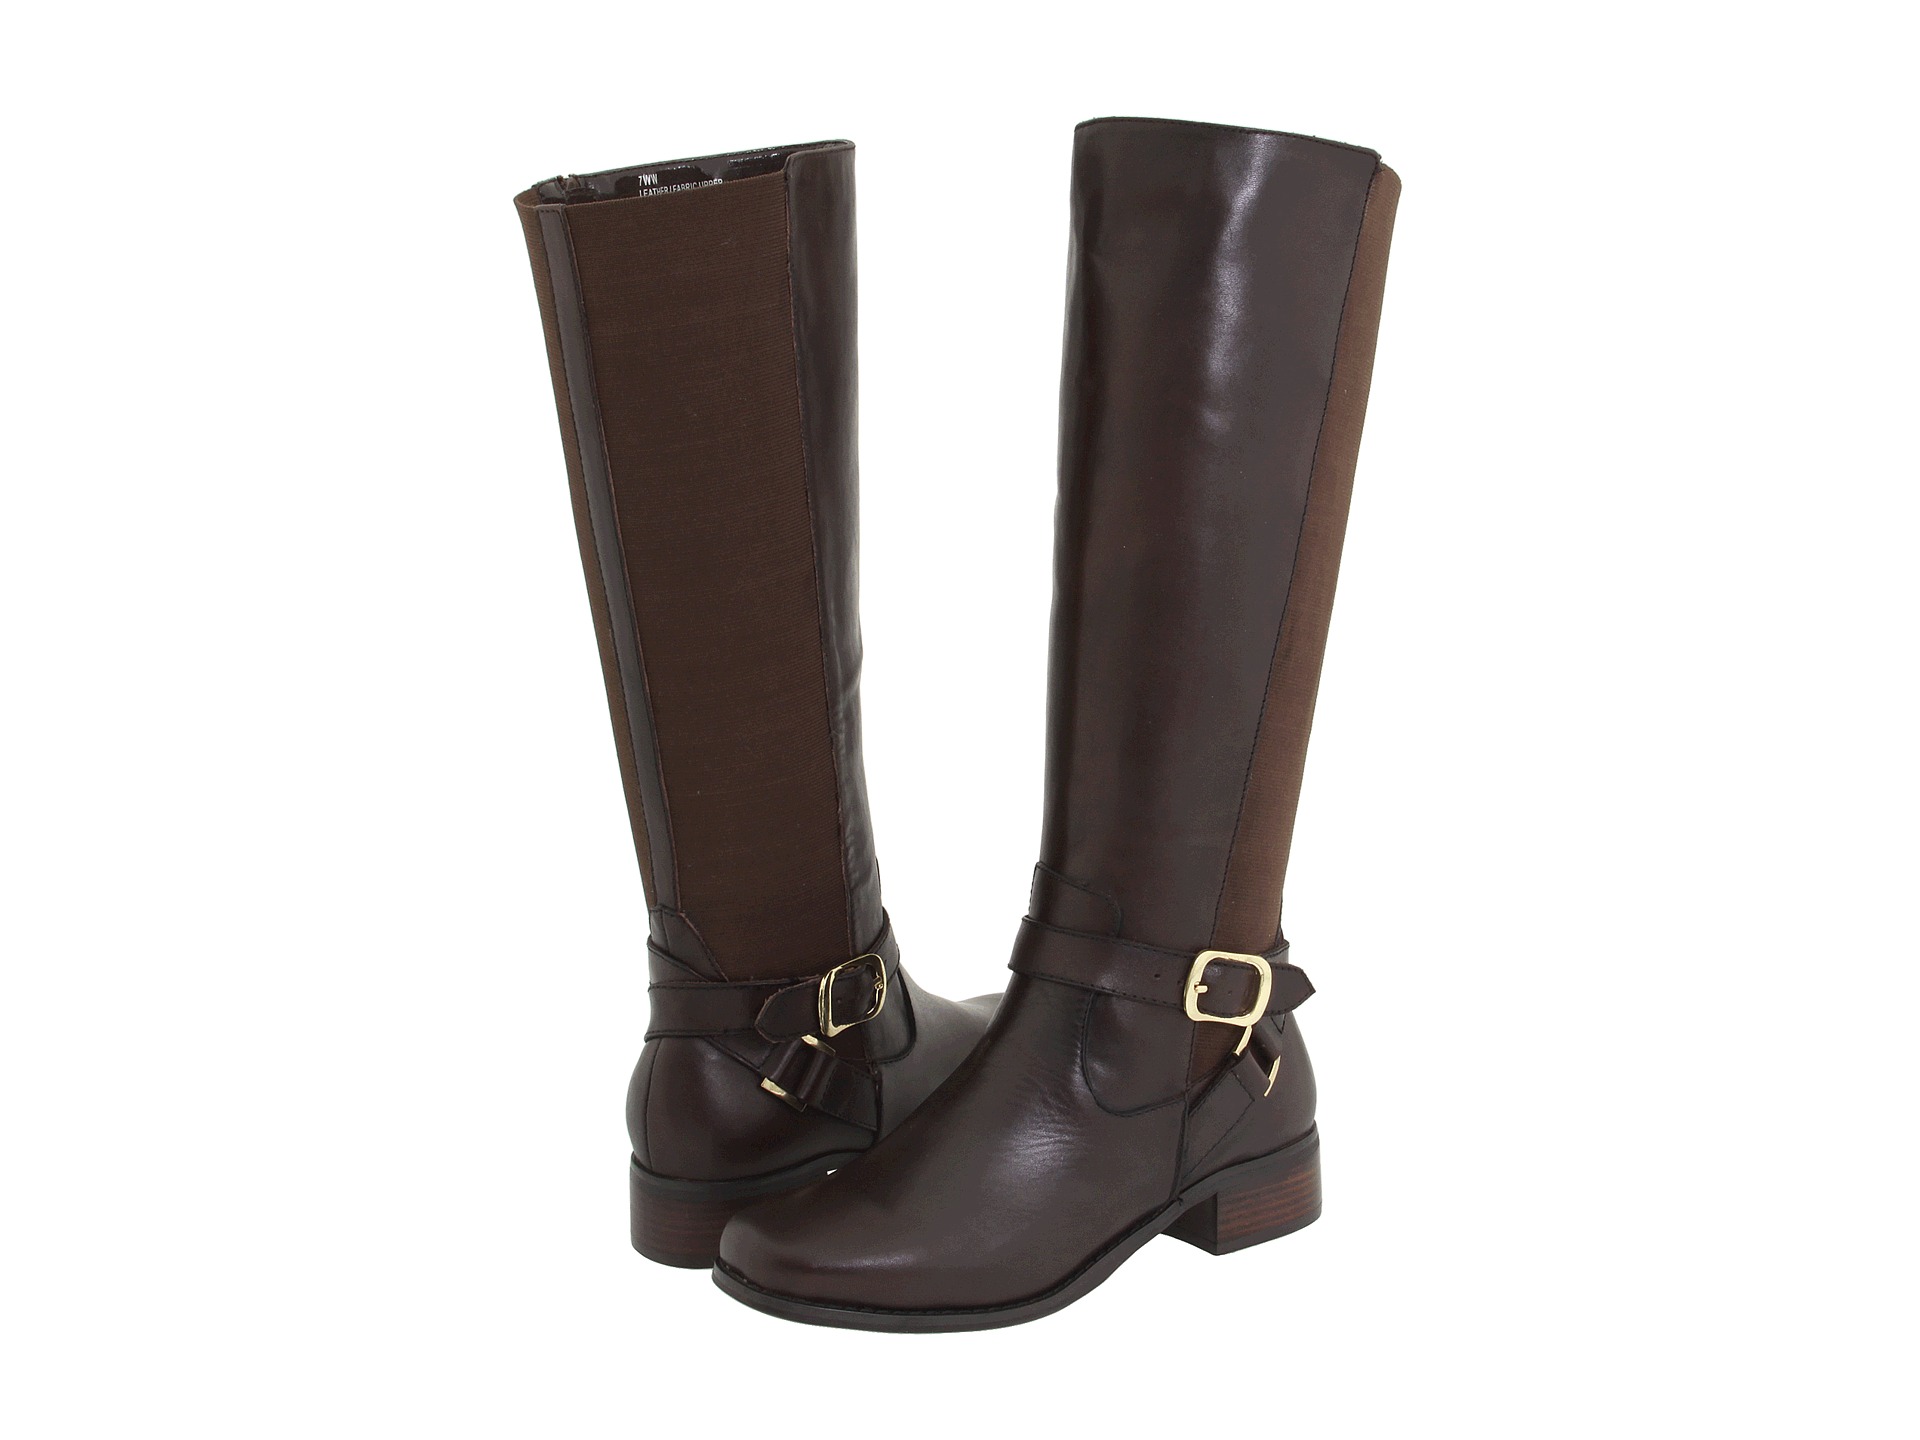 Fitzwell Mentor Wide Calf Boot | Shipped Free at Zappos